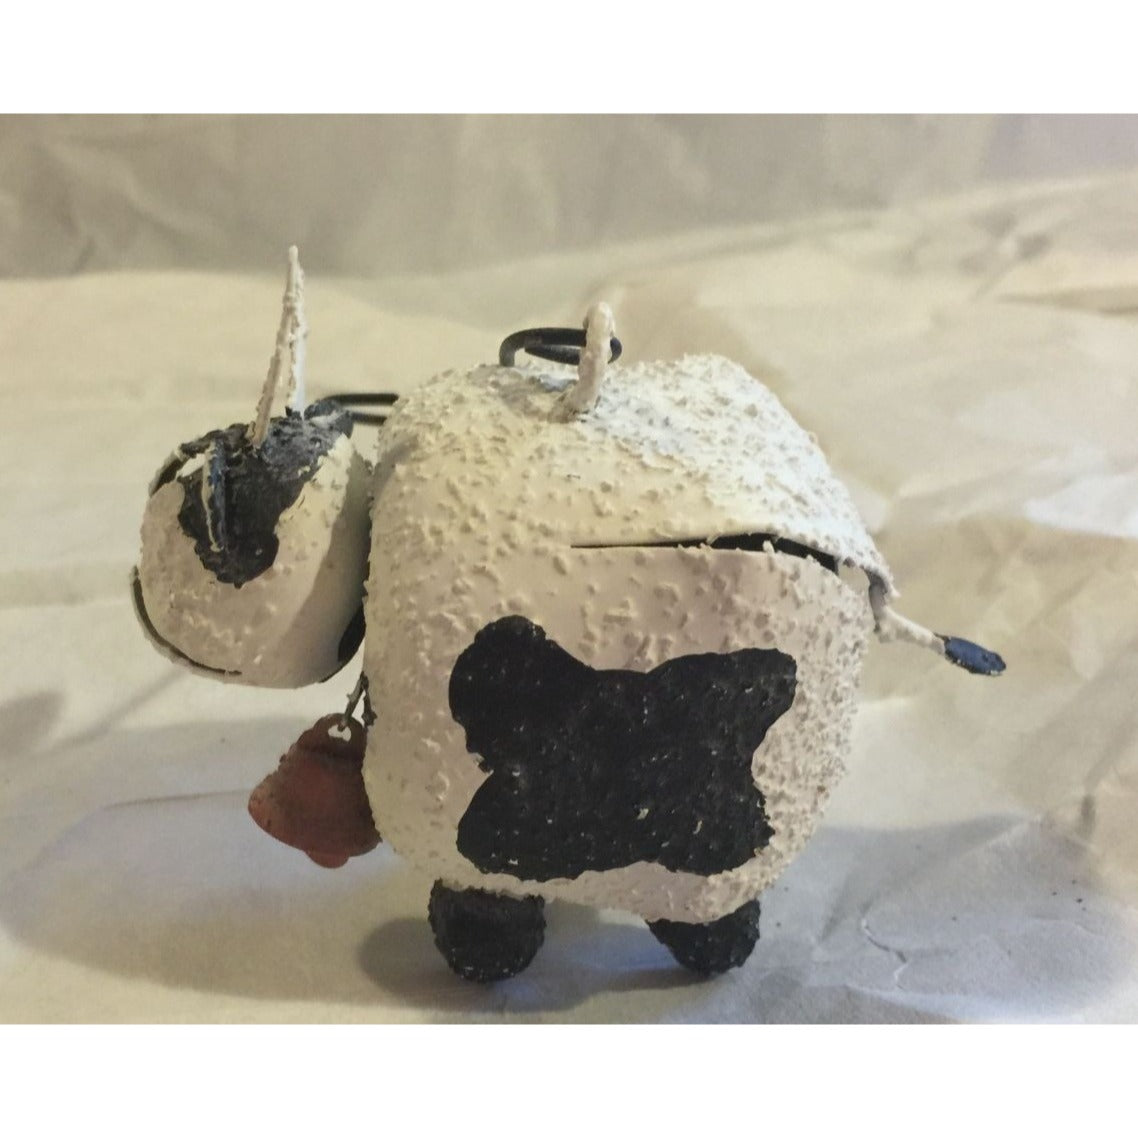 Vintage White And Black Metal Cow Ornament Made of Bells